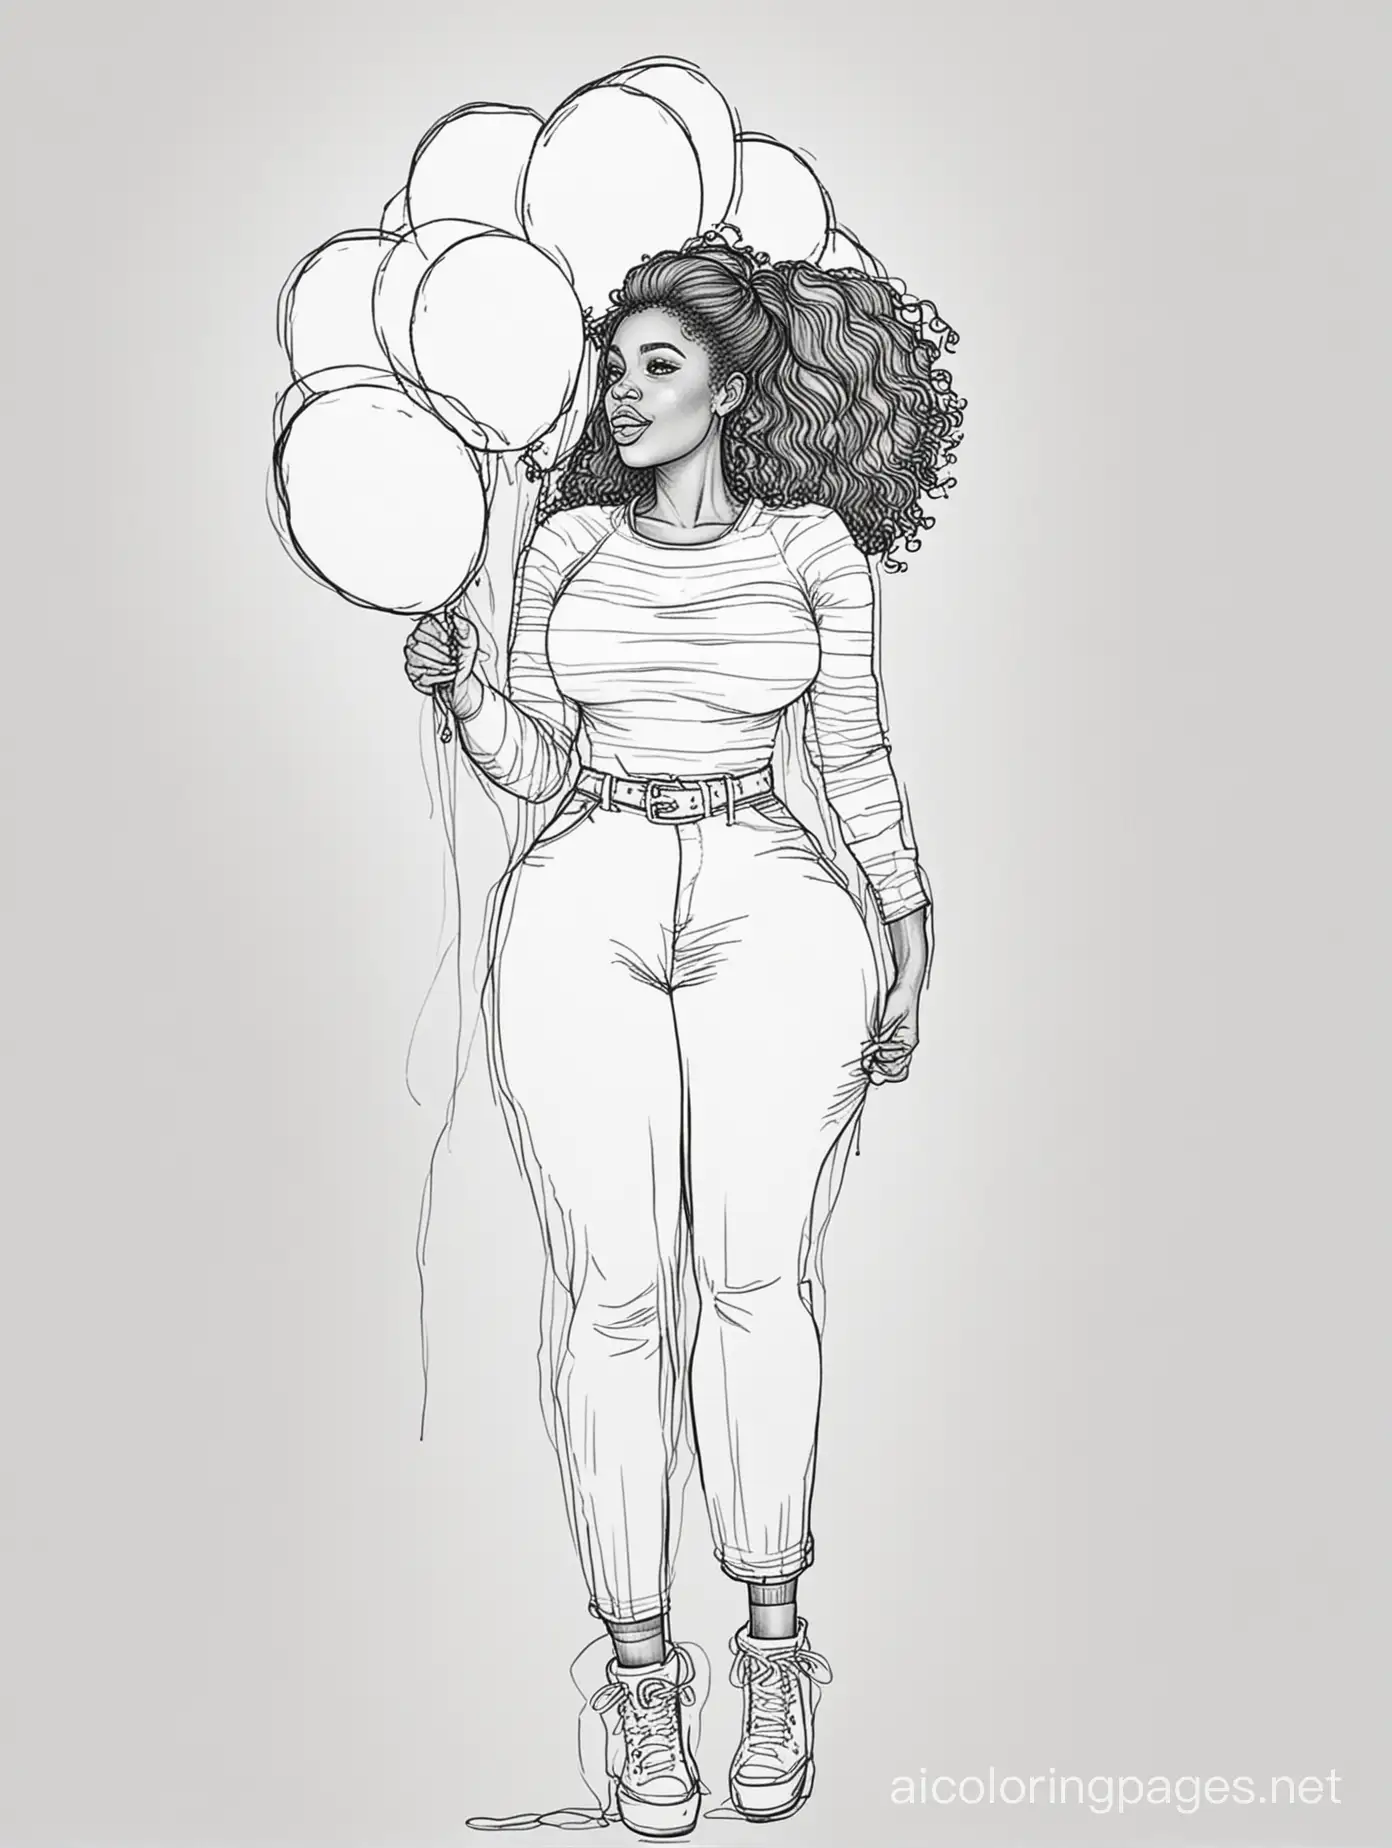 Curvy black woman holding balloons, Coloring Page, black and white, line art, white background, Simplicity, Ample White Space. The background of the coloring page is plain white to make it easy for young children to color within the lines. The outlines of all the subjects are easy to distinguish, making it simple for kids to color without too much difficulty